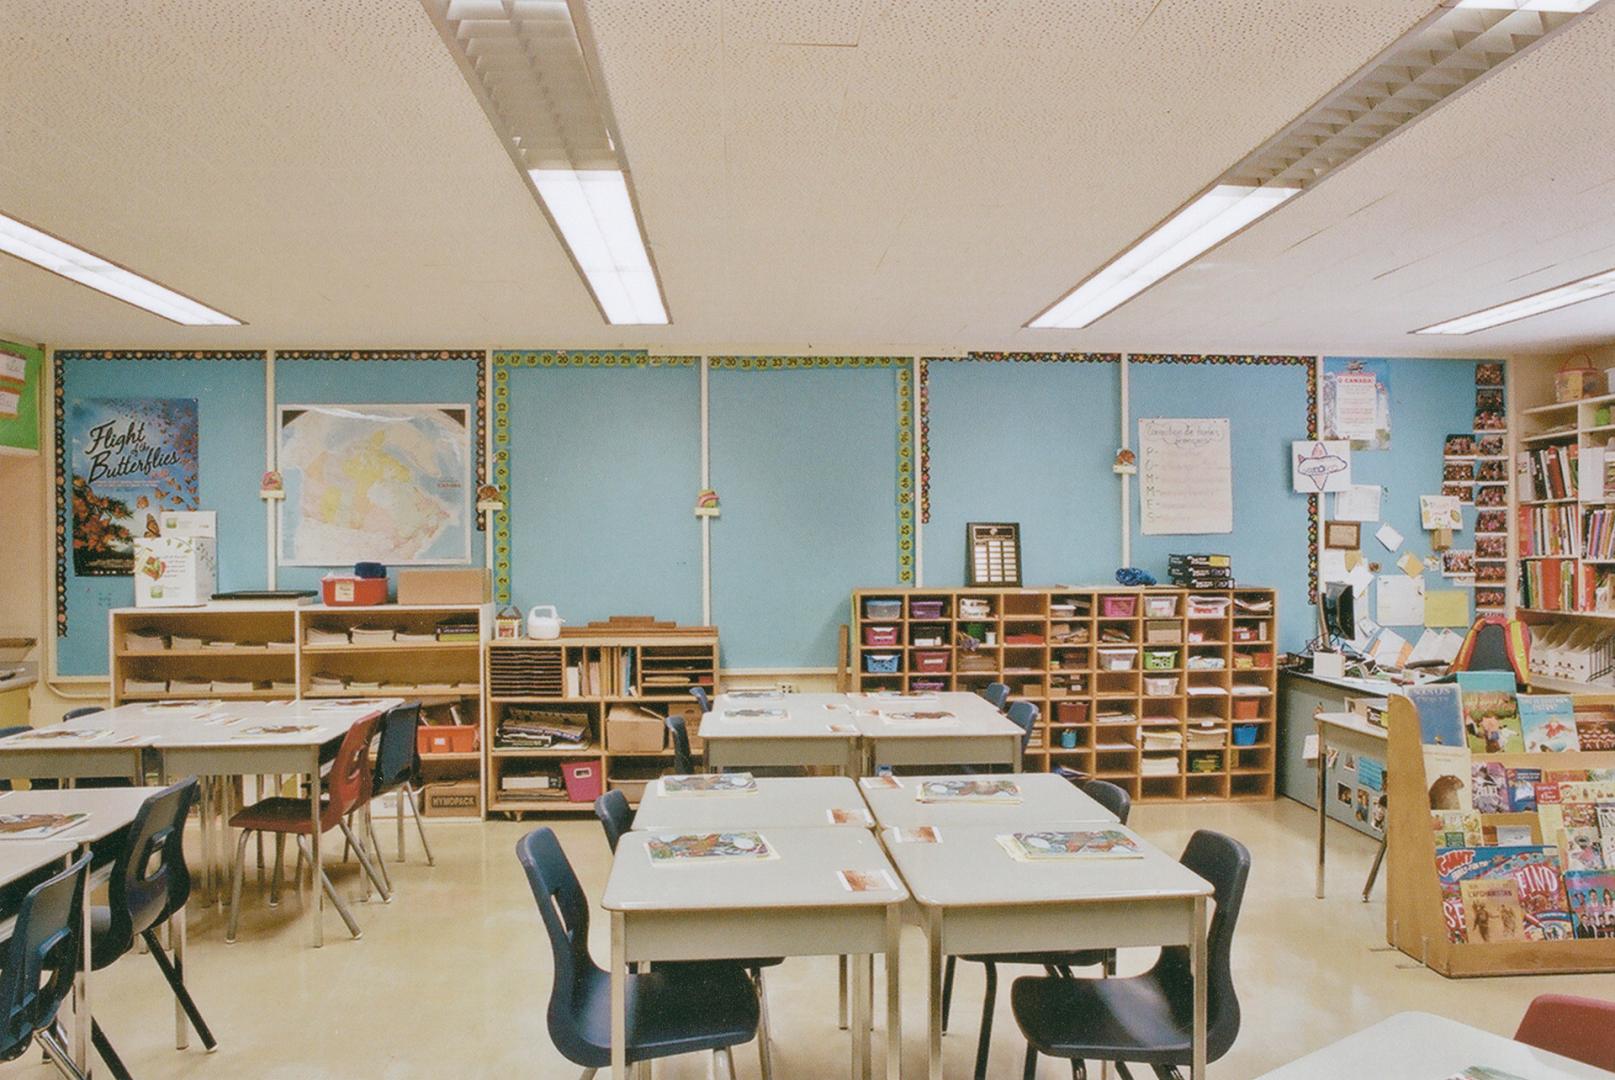 A photograph of a public school classroom, with desks, chairs, a chalkboard and shelving units.